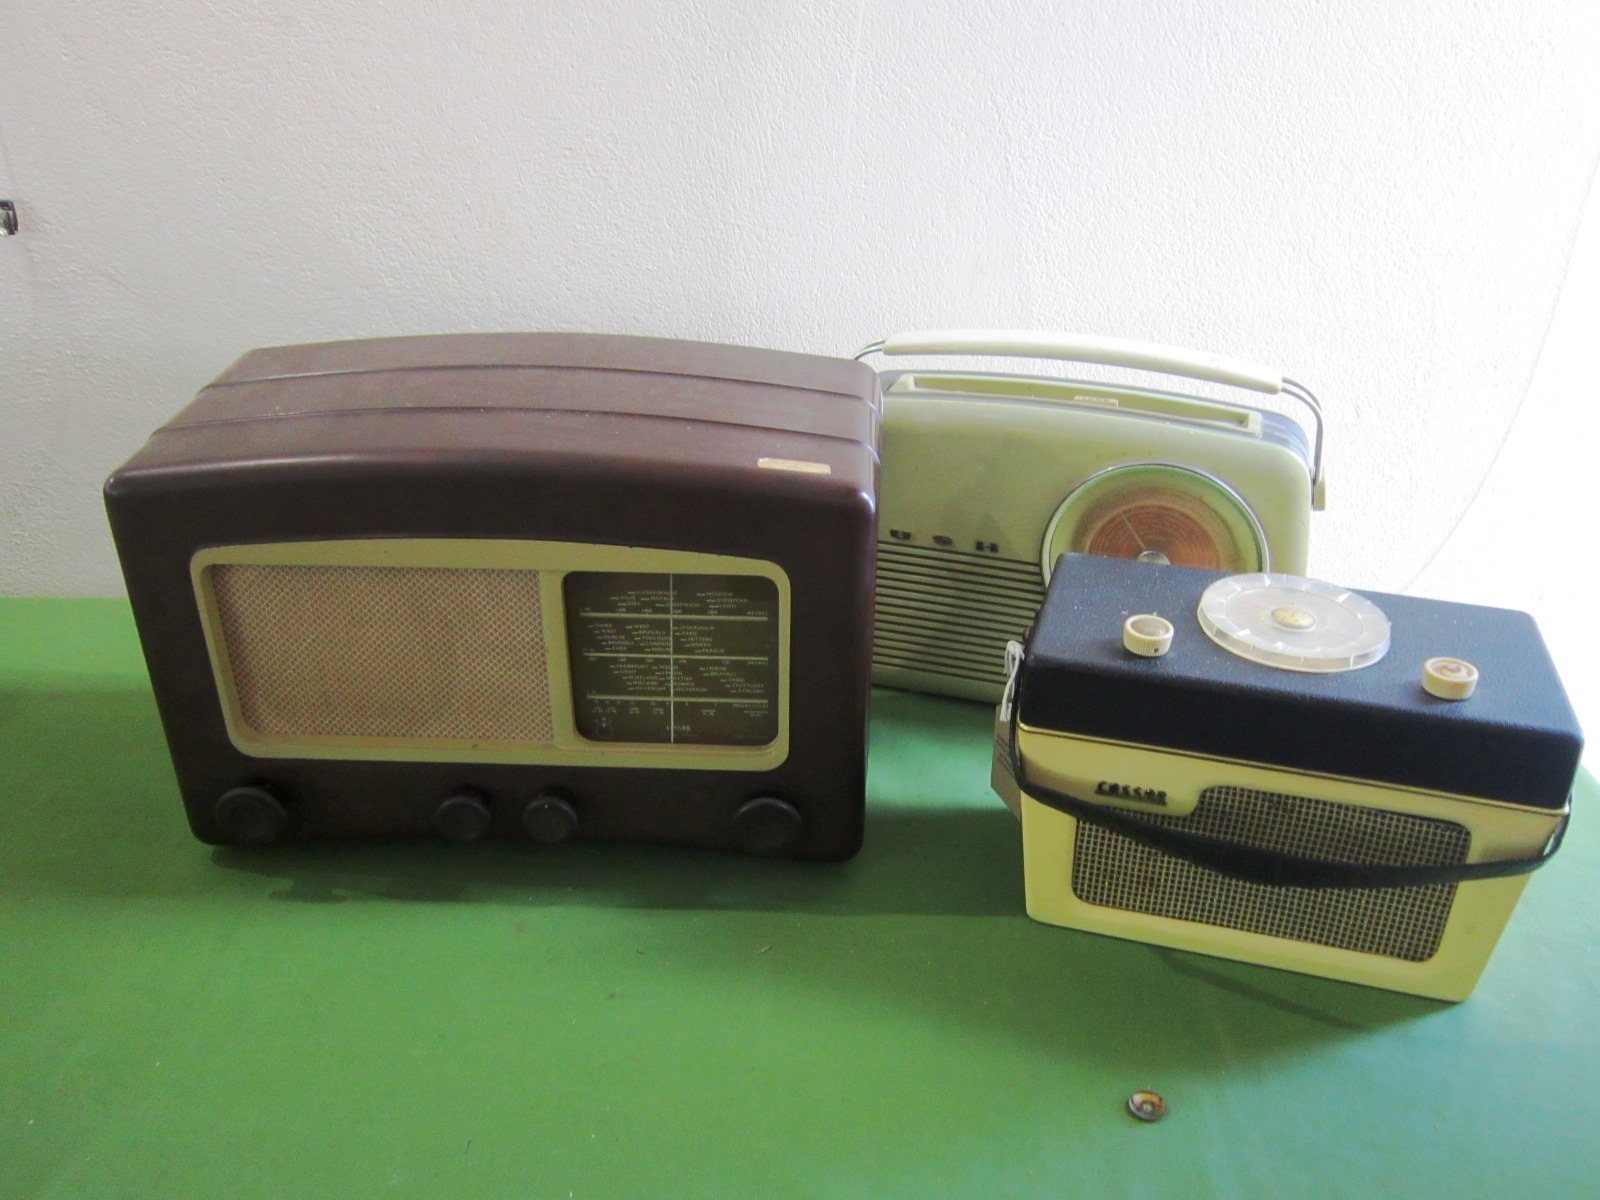 A COSSOR 'MELODY MAKER' BROWN BAKELITE RADIO circa late 1940s; together with a Cossor portable